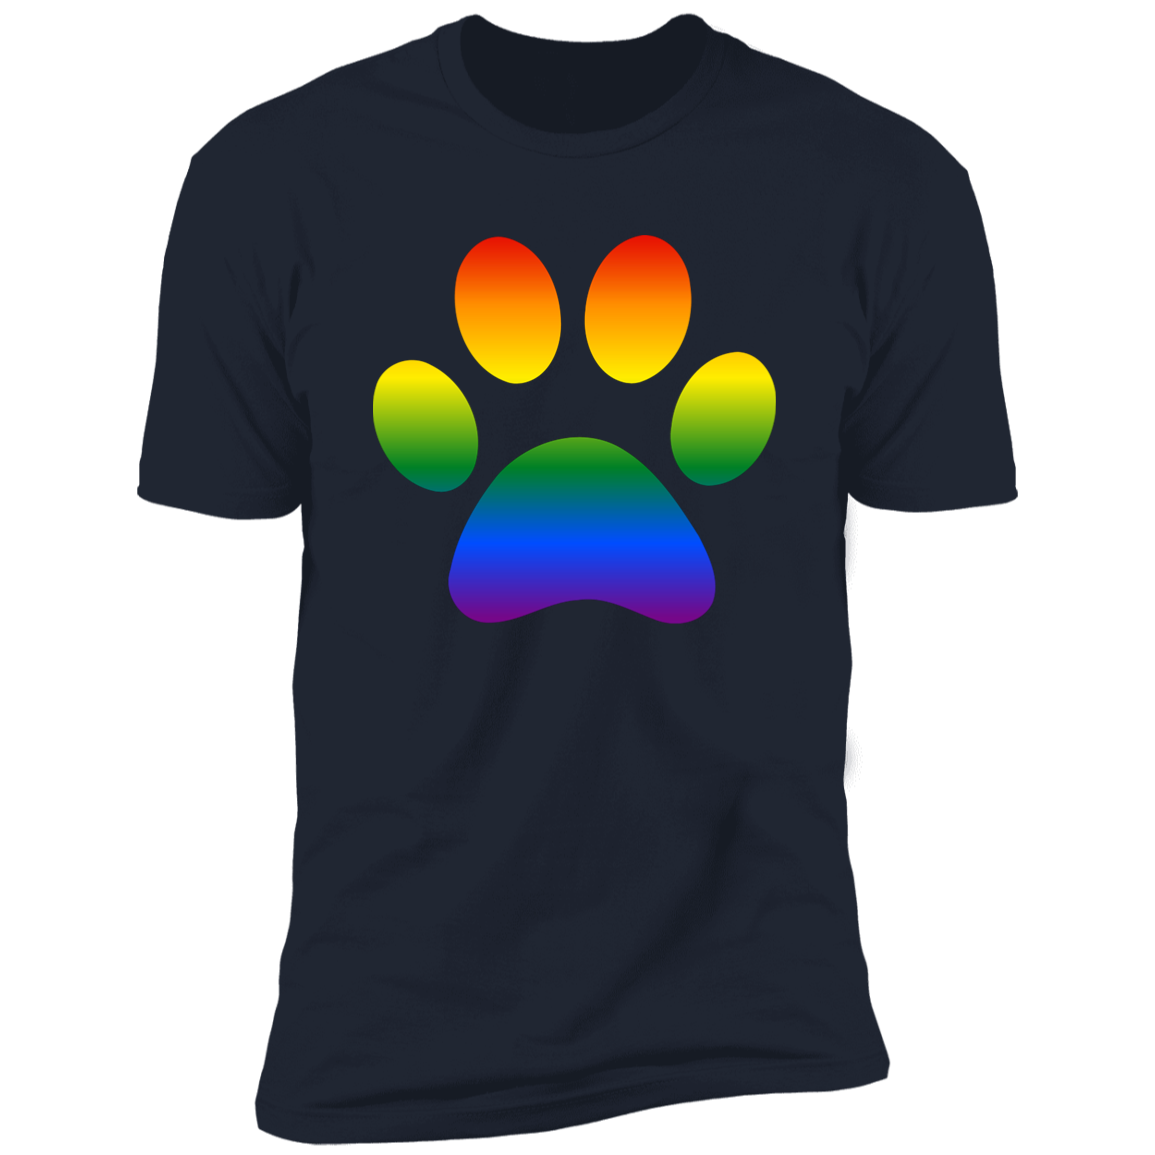 Dog paw Pride, Dog Pride shirt for humas, in navy blue